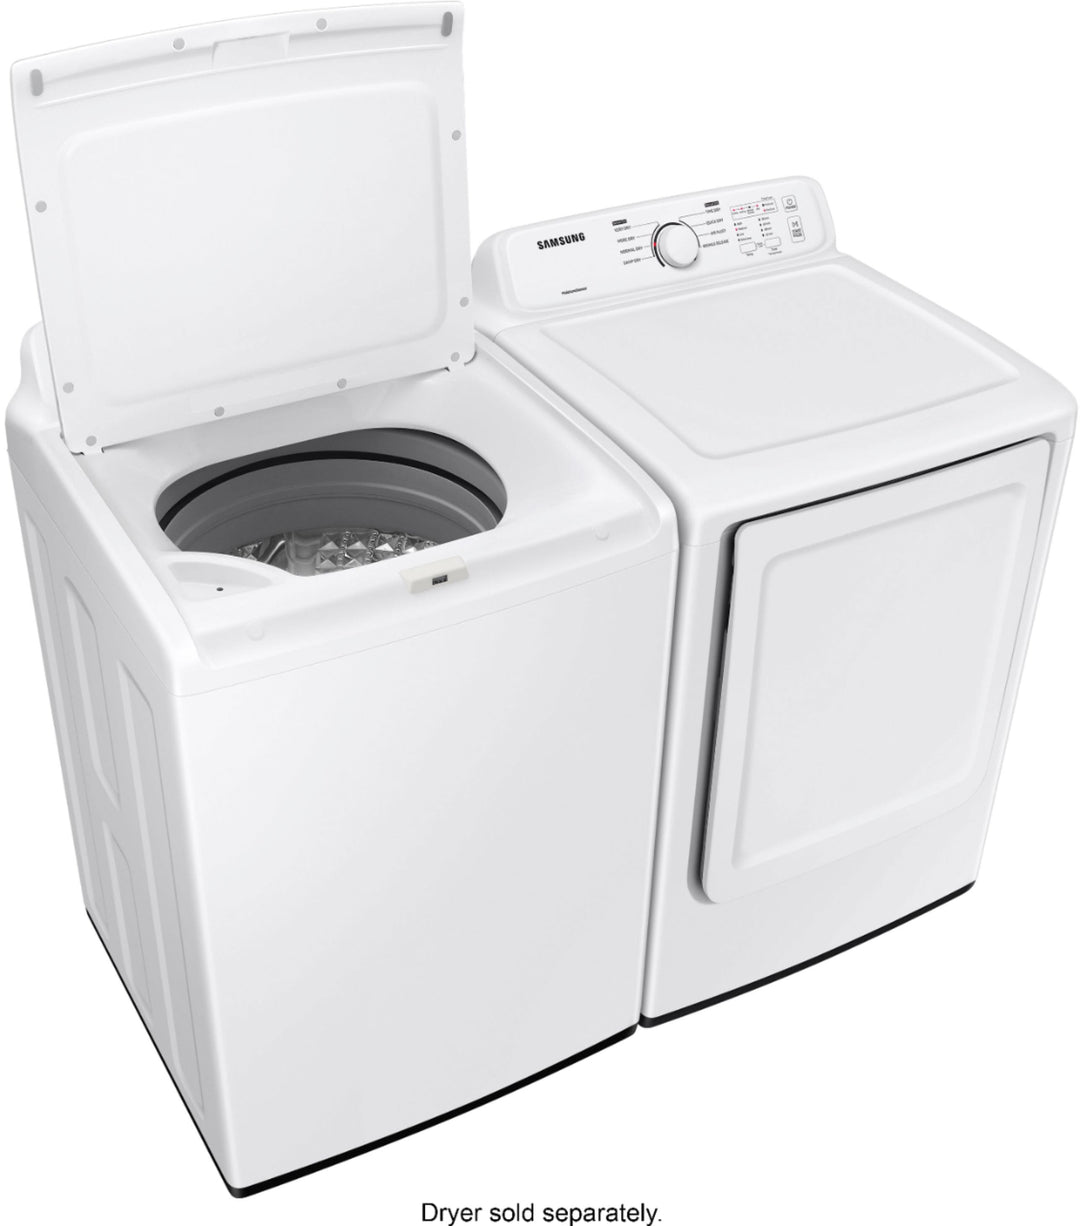 Samsung - 4.0 cu. ft. High-Efficiency Top Load Washer with ActiveWave Agitator and Soft-Close Lid - White_6